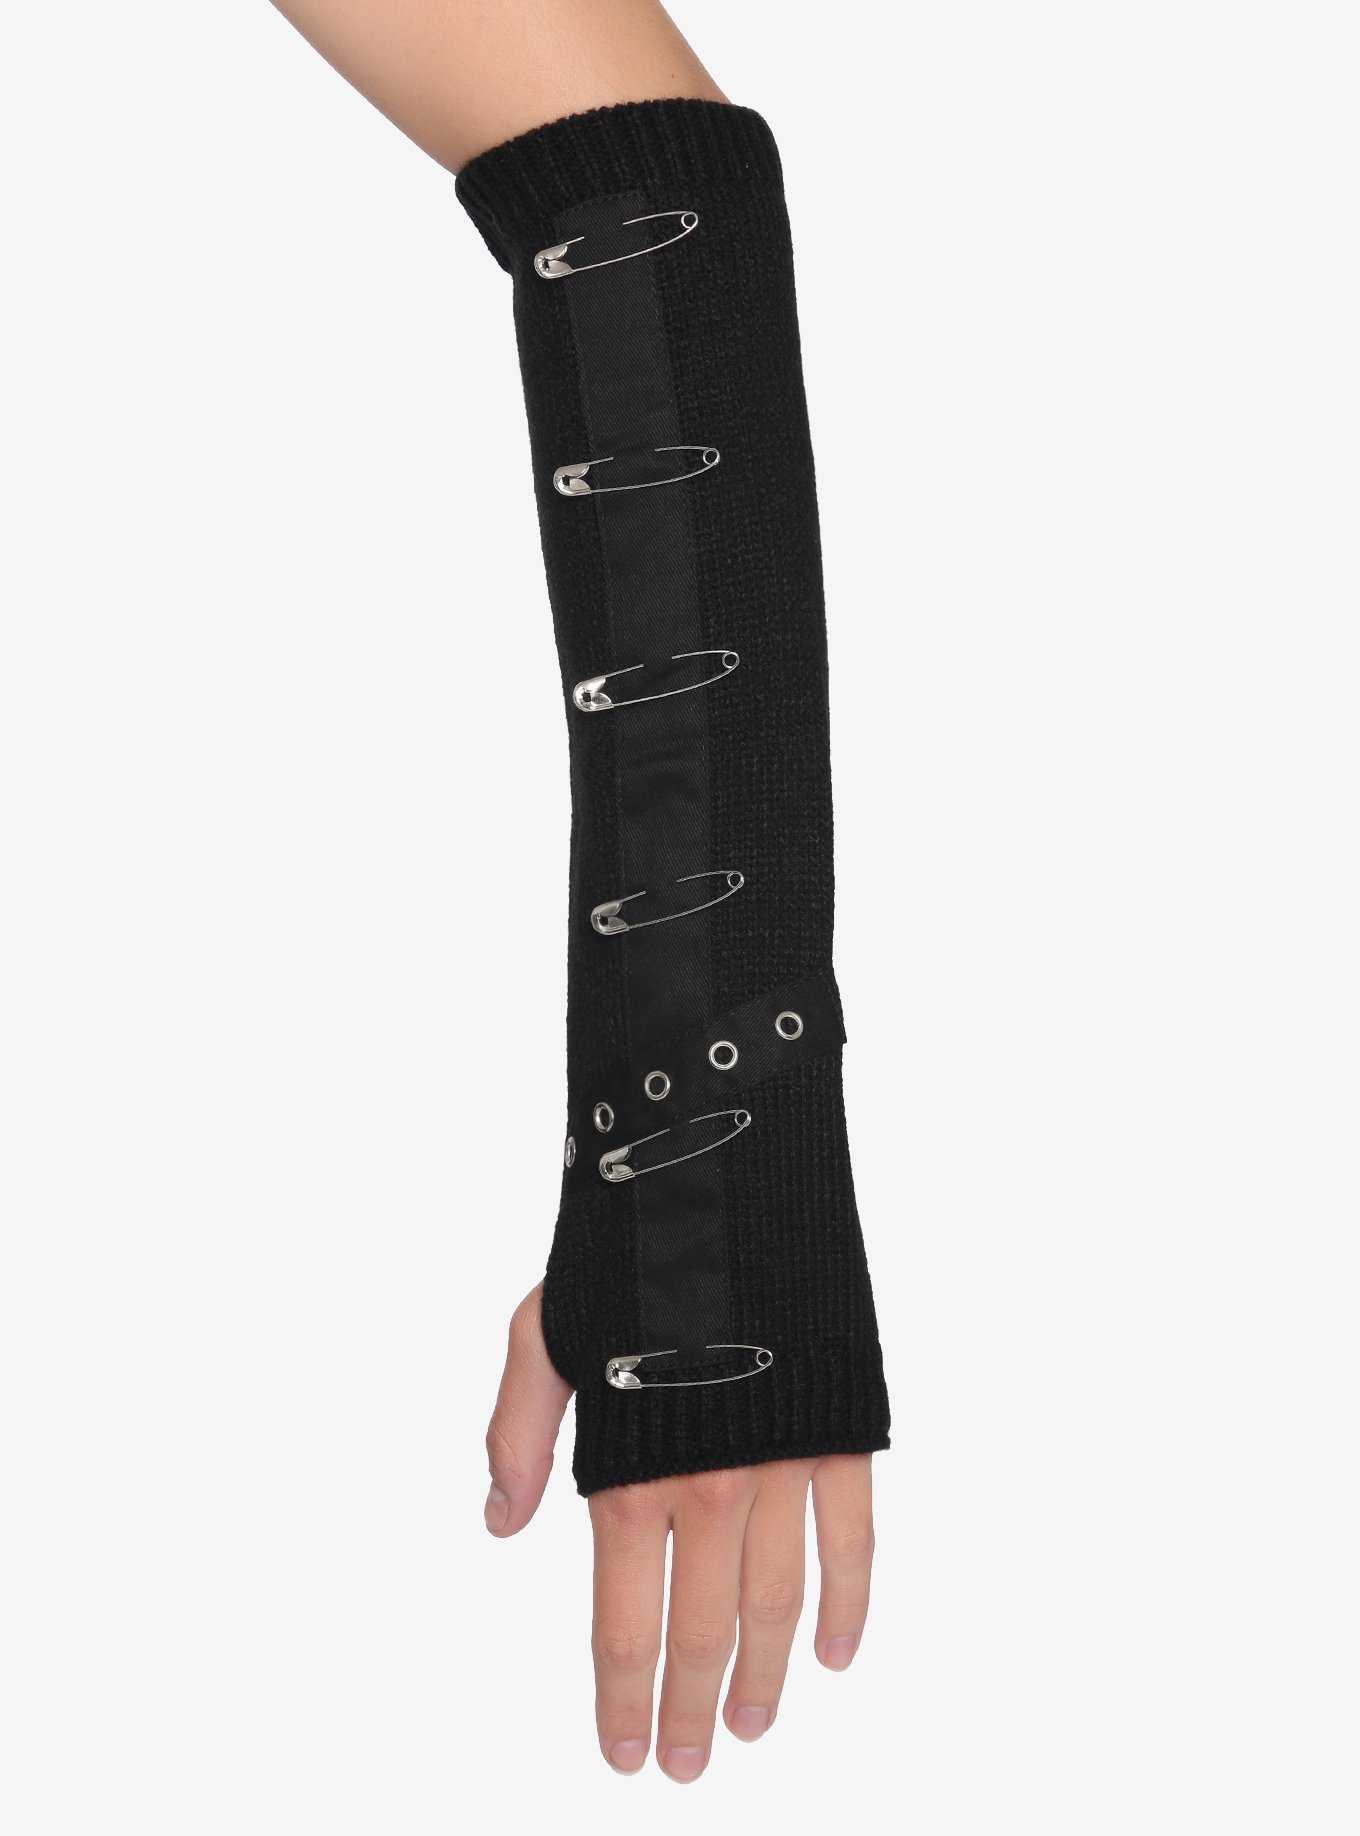 Black Grommet & Safety Pin Arm Warmers, , hi-res